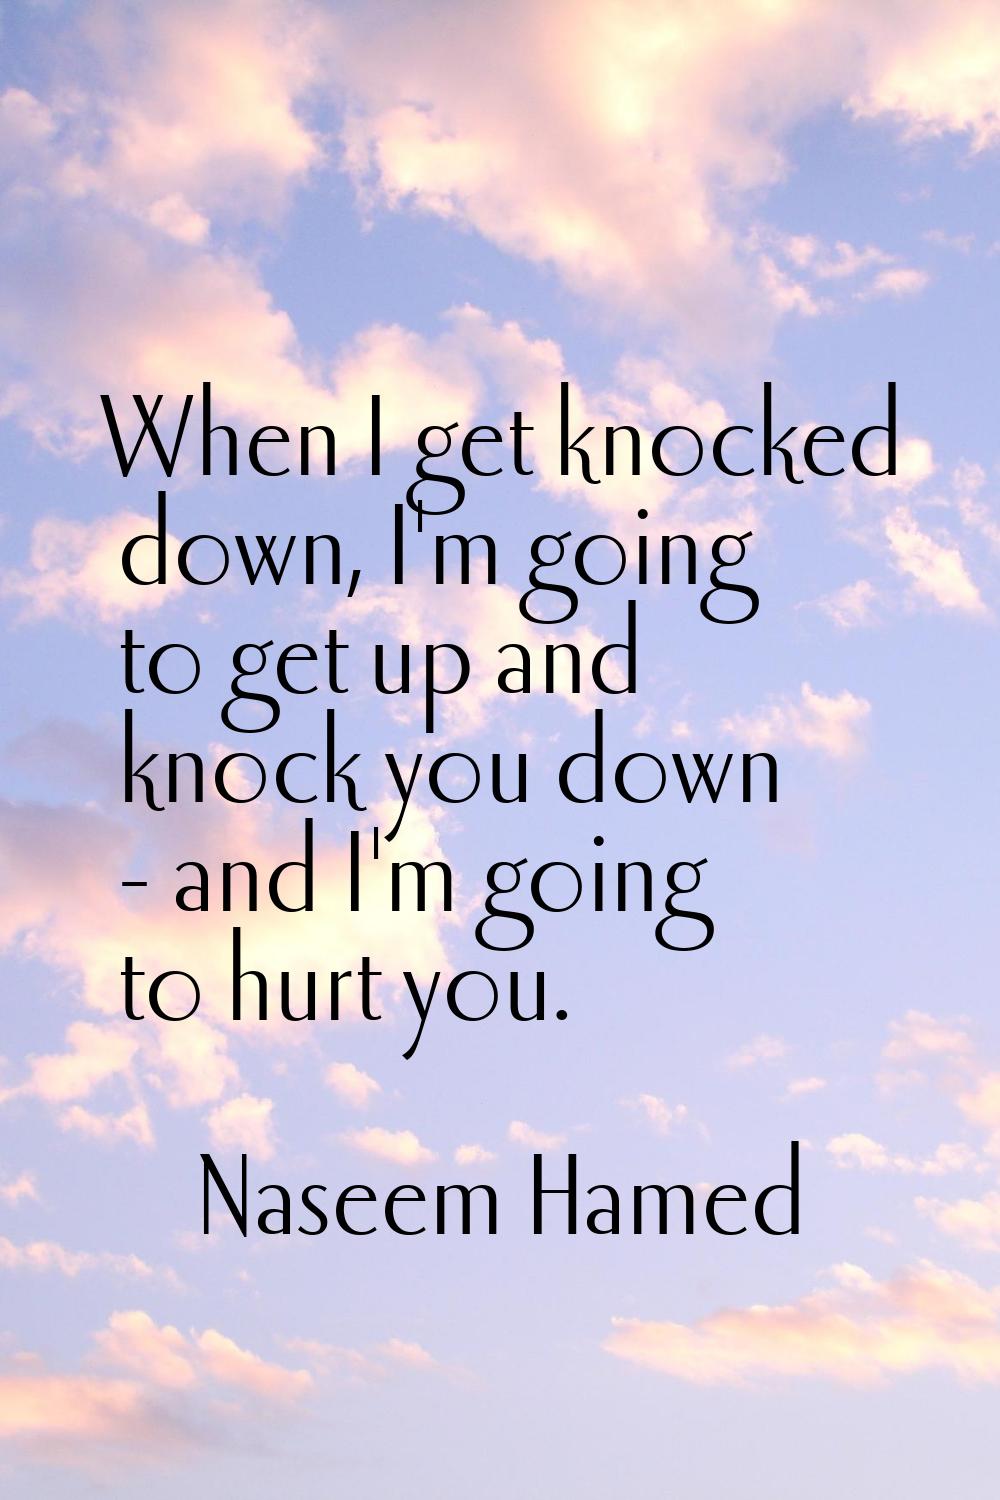 When I get knocked down, I'm going to get up and knock you down - and I'm going to hurt you.